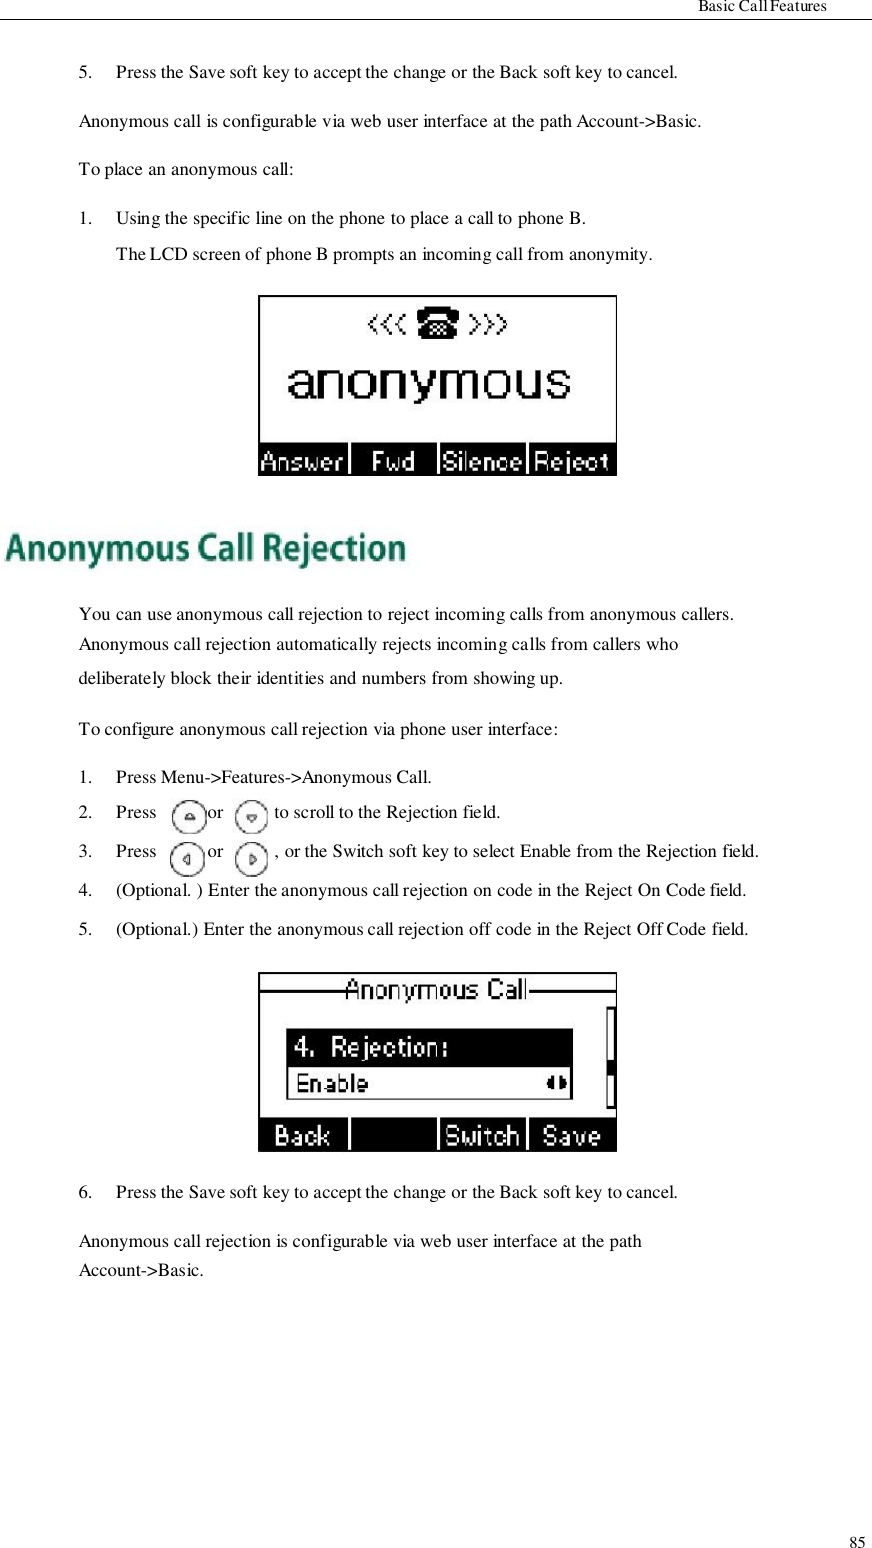                   Basic Call Features   5.   Press the Save soft key to accept the change or the Back soft key to cancel.  Anonymous call is configurable via web user interface at the path Account-&gt;Basic.  To place an anonymous call:  1.  Using the specific line on the phone to place a call to phone B. The LCD screen of phone B prompts an incoming call from anonymity.                 You can use anonymous call rejection to reject incoming calls from anonymous callers. Anonymous call rejection automatically rejects incoming calls from callers who deliberately block their identities and numbers from showing up.  To configure anonymous call rejection via phone user interface:  1.   Press Menu-&gt;Features-&gt;Anonymous Call. 2. 3. Press Press or or to scroll to the Rejection field. , or the Switch soft key to select Enable from the Rejection field. 4. 5.            6. (Optional. ) Enter the anonymous call rejection on code in the Reject On Code field. (Optional.) Enter the anonymous call rejection off code in the Reject Off Code field.            Press the Save soft key to accept the change or the Back soft key to cancel.  Anonymous call rejection is configurable via web user interface at the path Account-&gt;Basic.            85